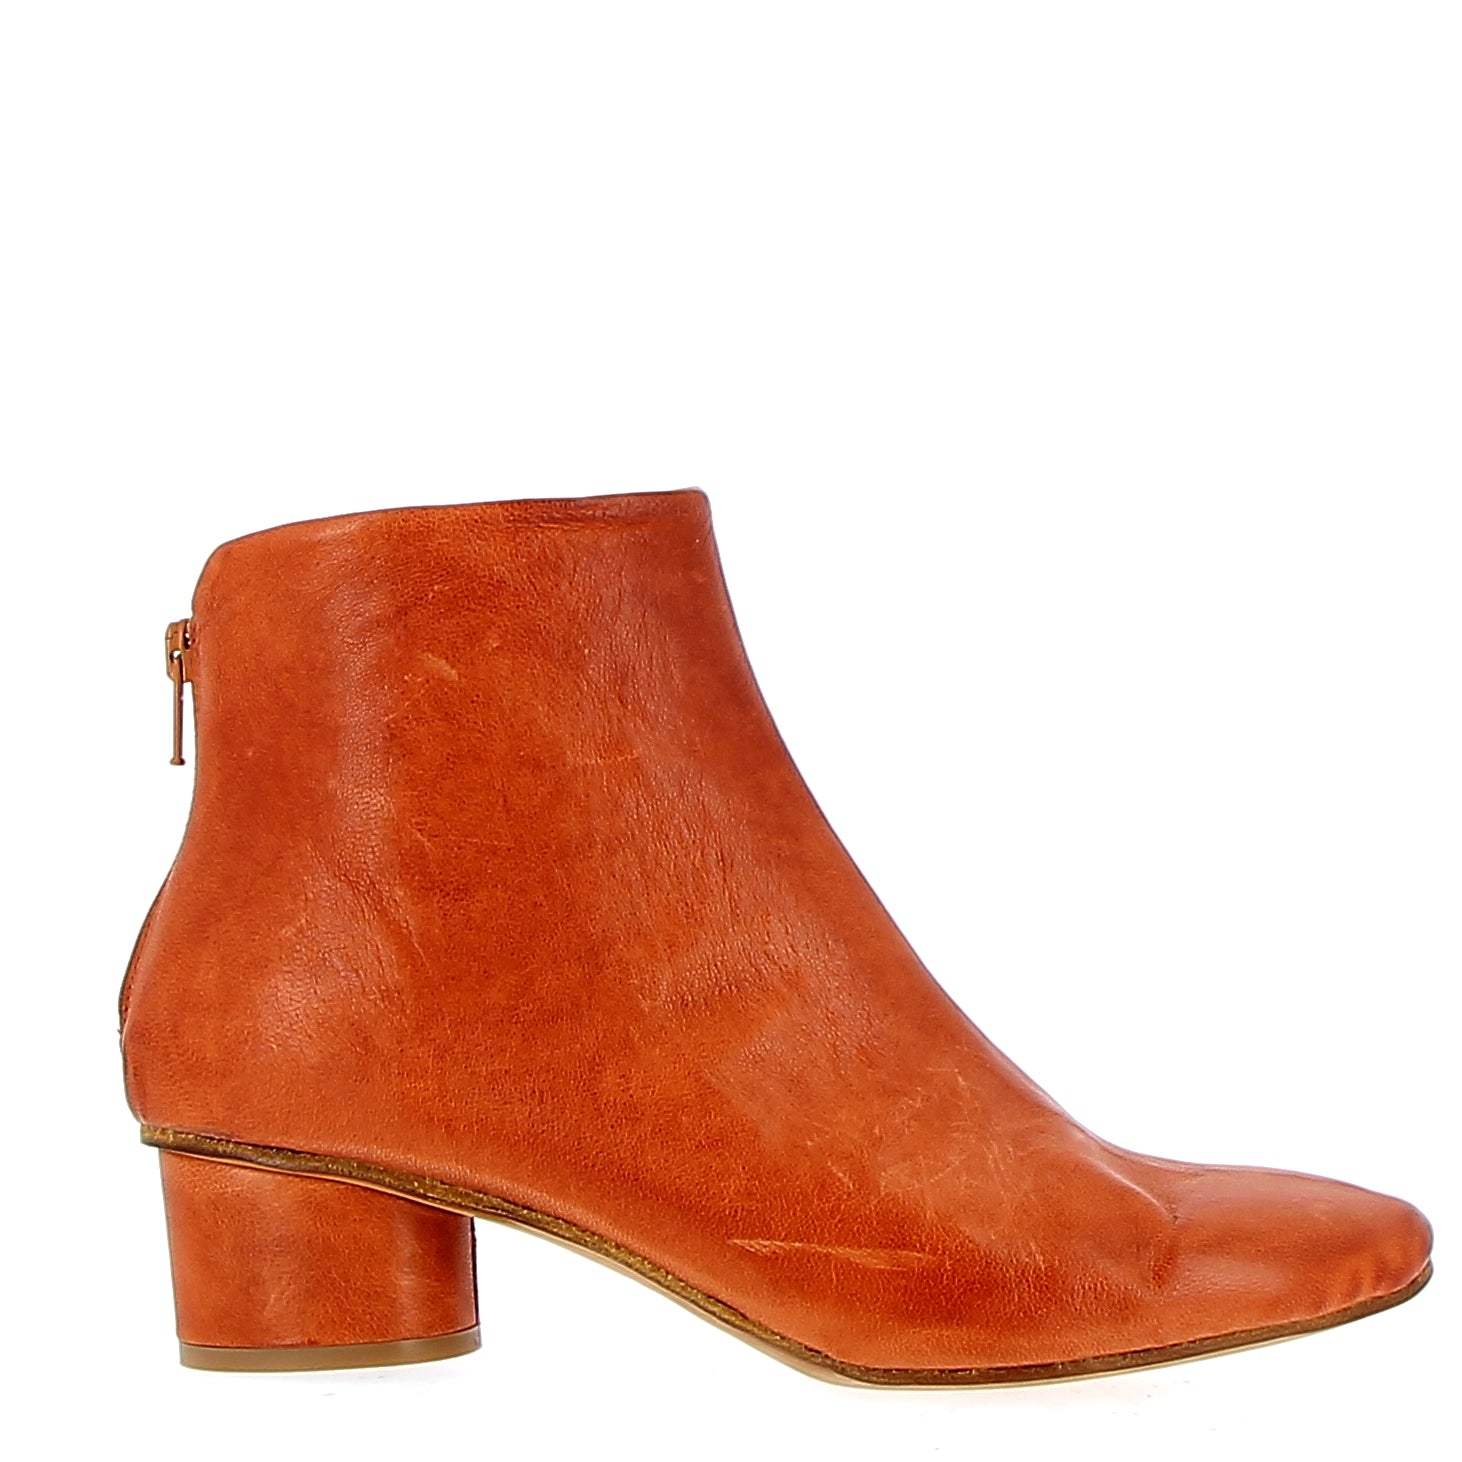 Peach leather ankle boot